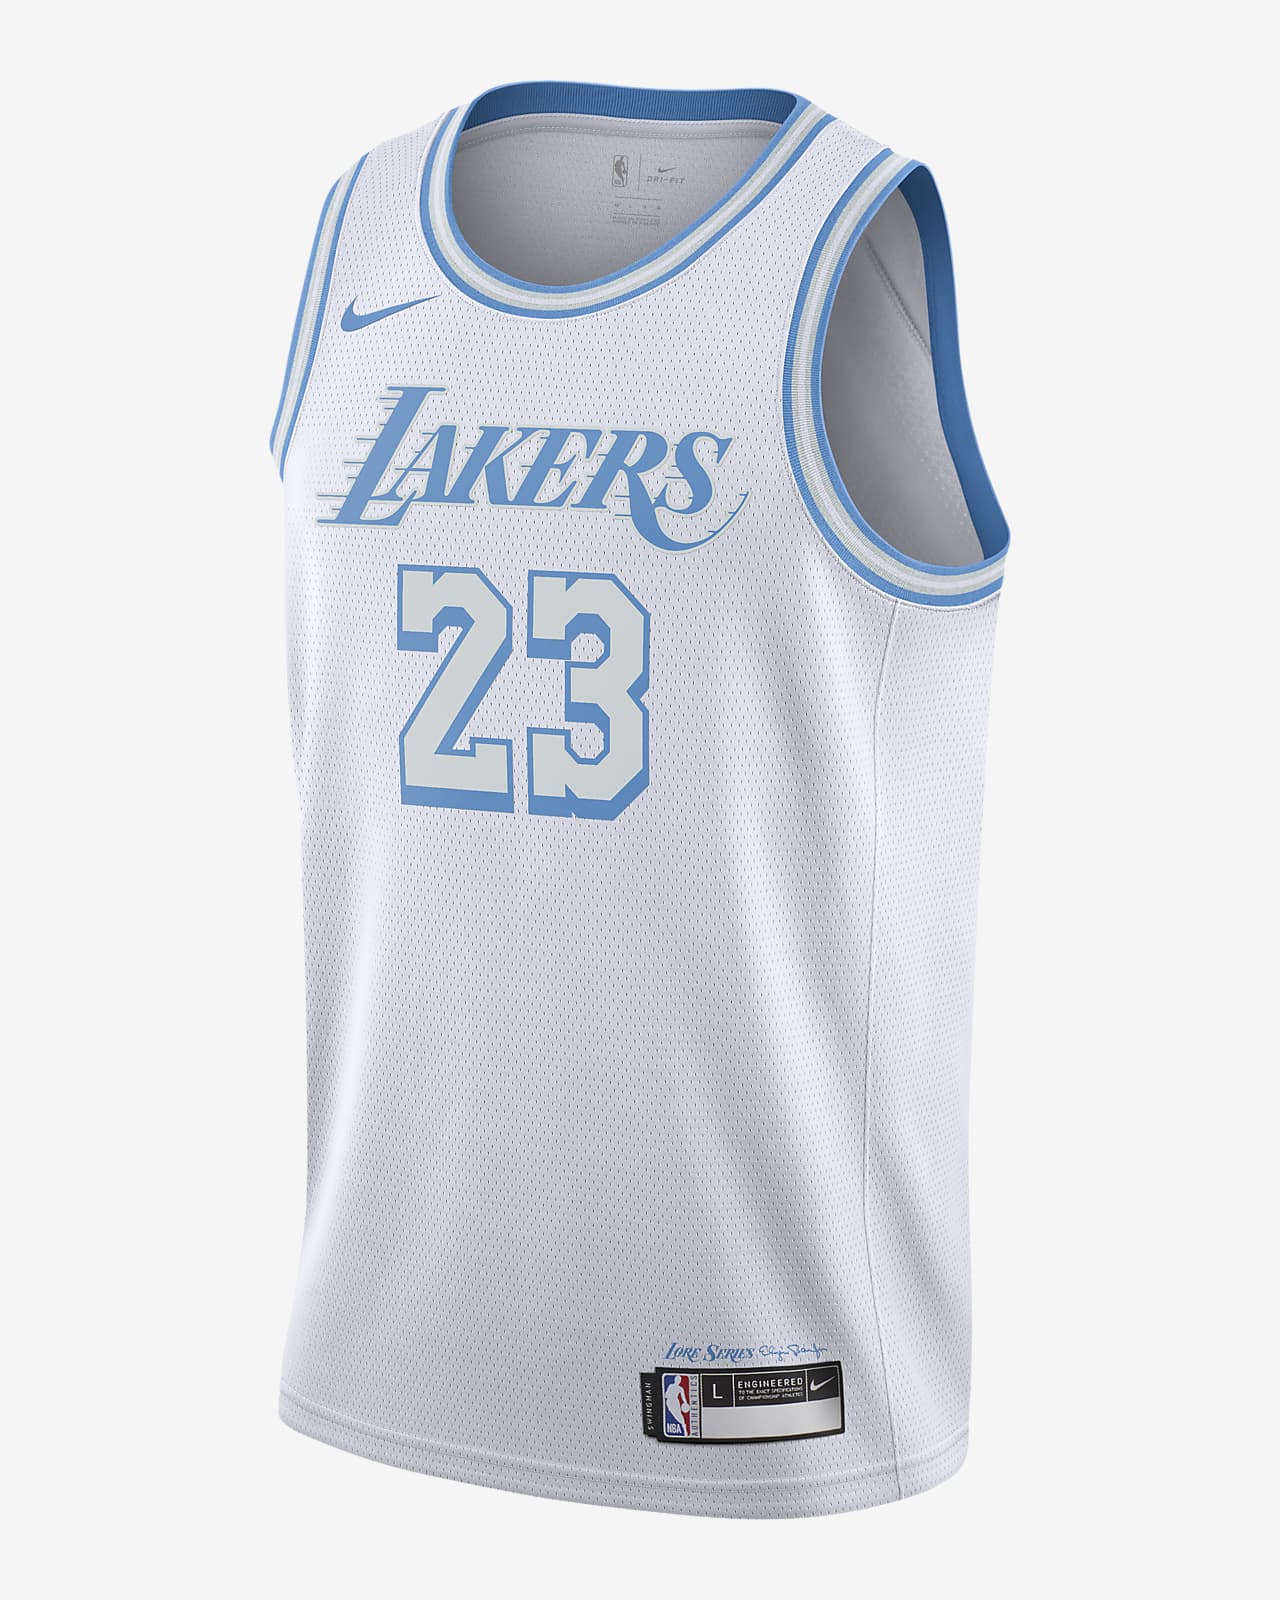 lakers edition jersey